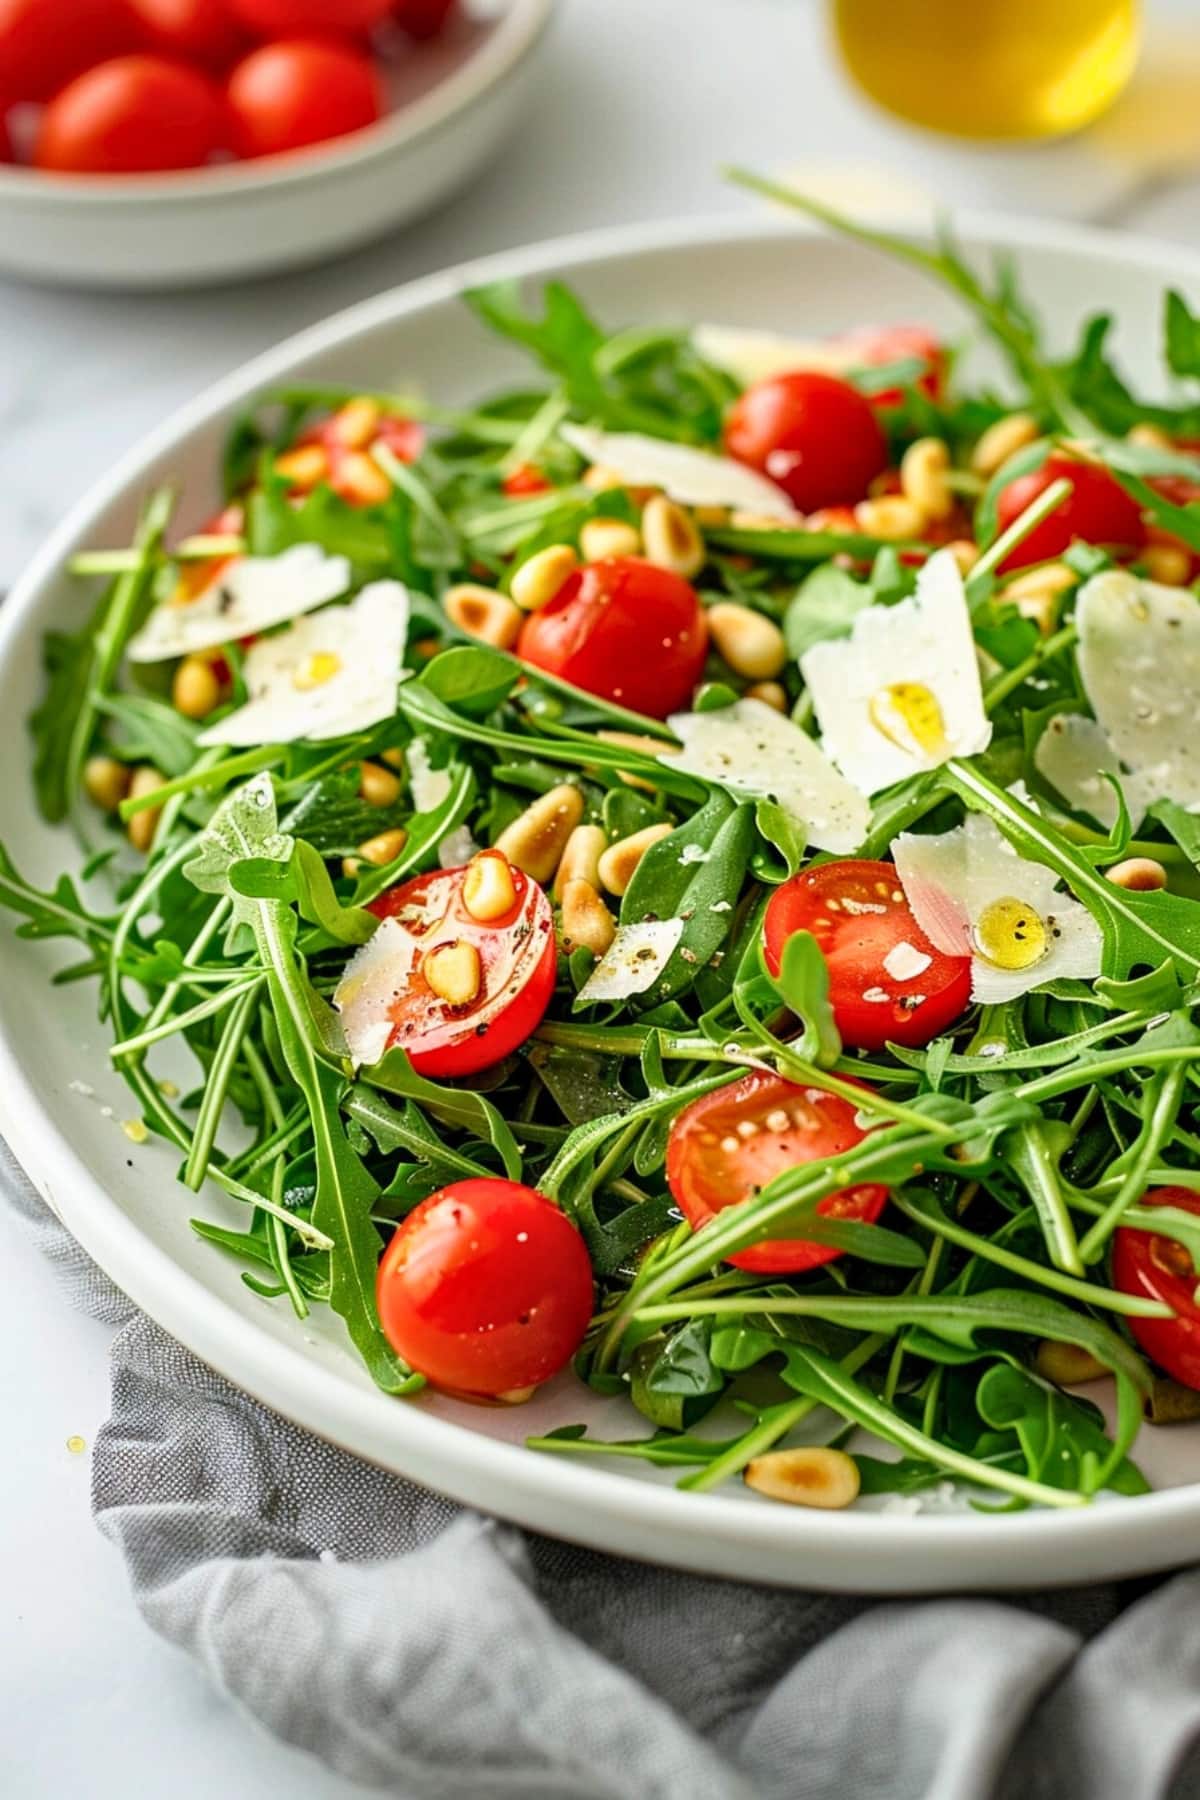 Arugula salad with cherry tomatoes, arugula and roasted pine nuts drizzled with lemon dressing garnished with shaved parmesan cheese on a white plate.